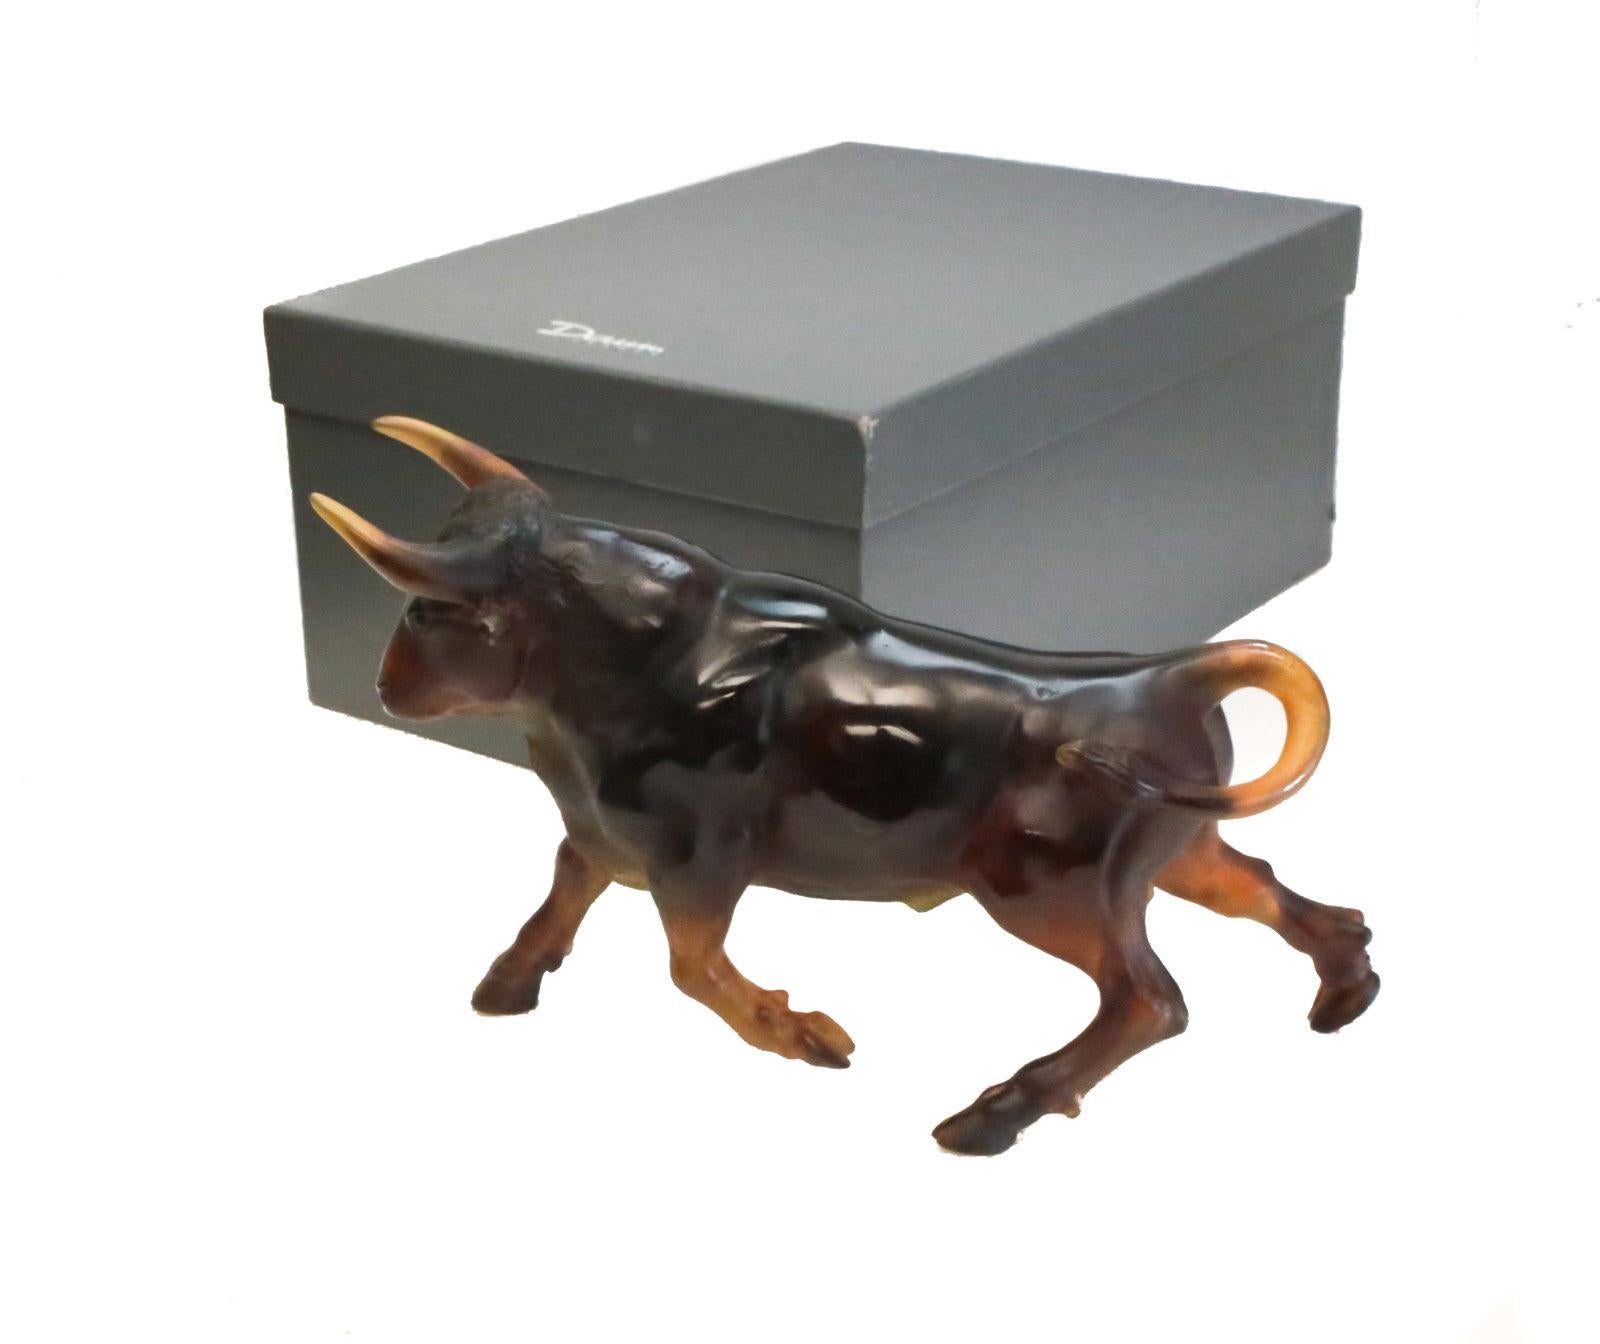 A charming Daum France Pat-de-Verre multi-colored bull figurine in original box. The figurine transitions from brown to amber to the bull's feet. Incised 